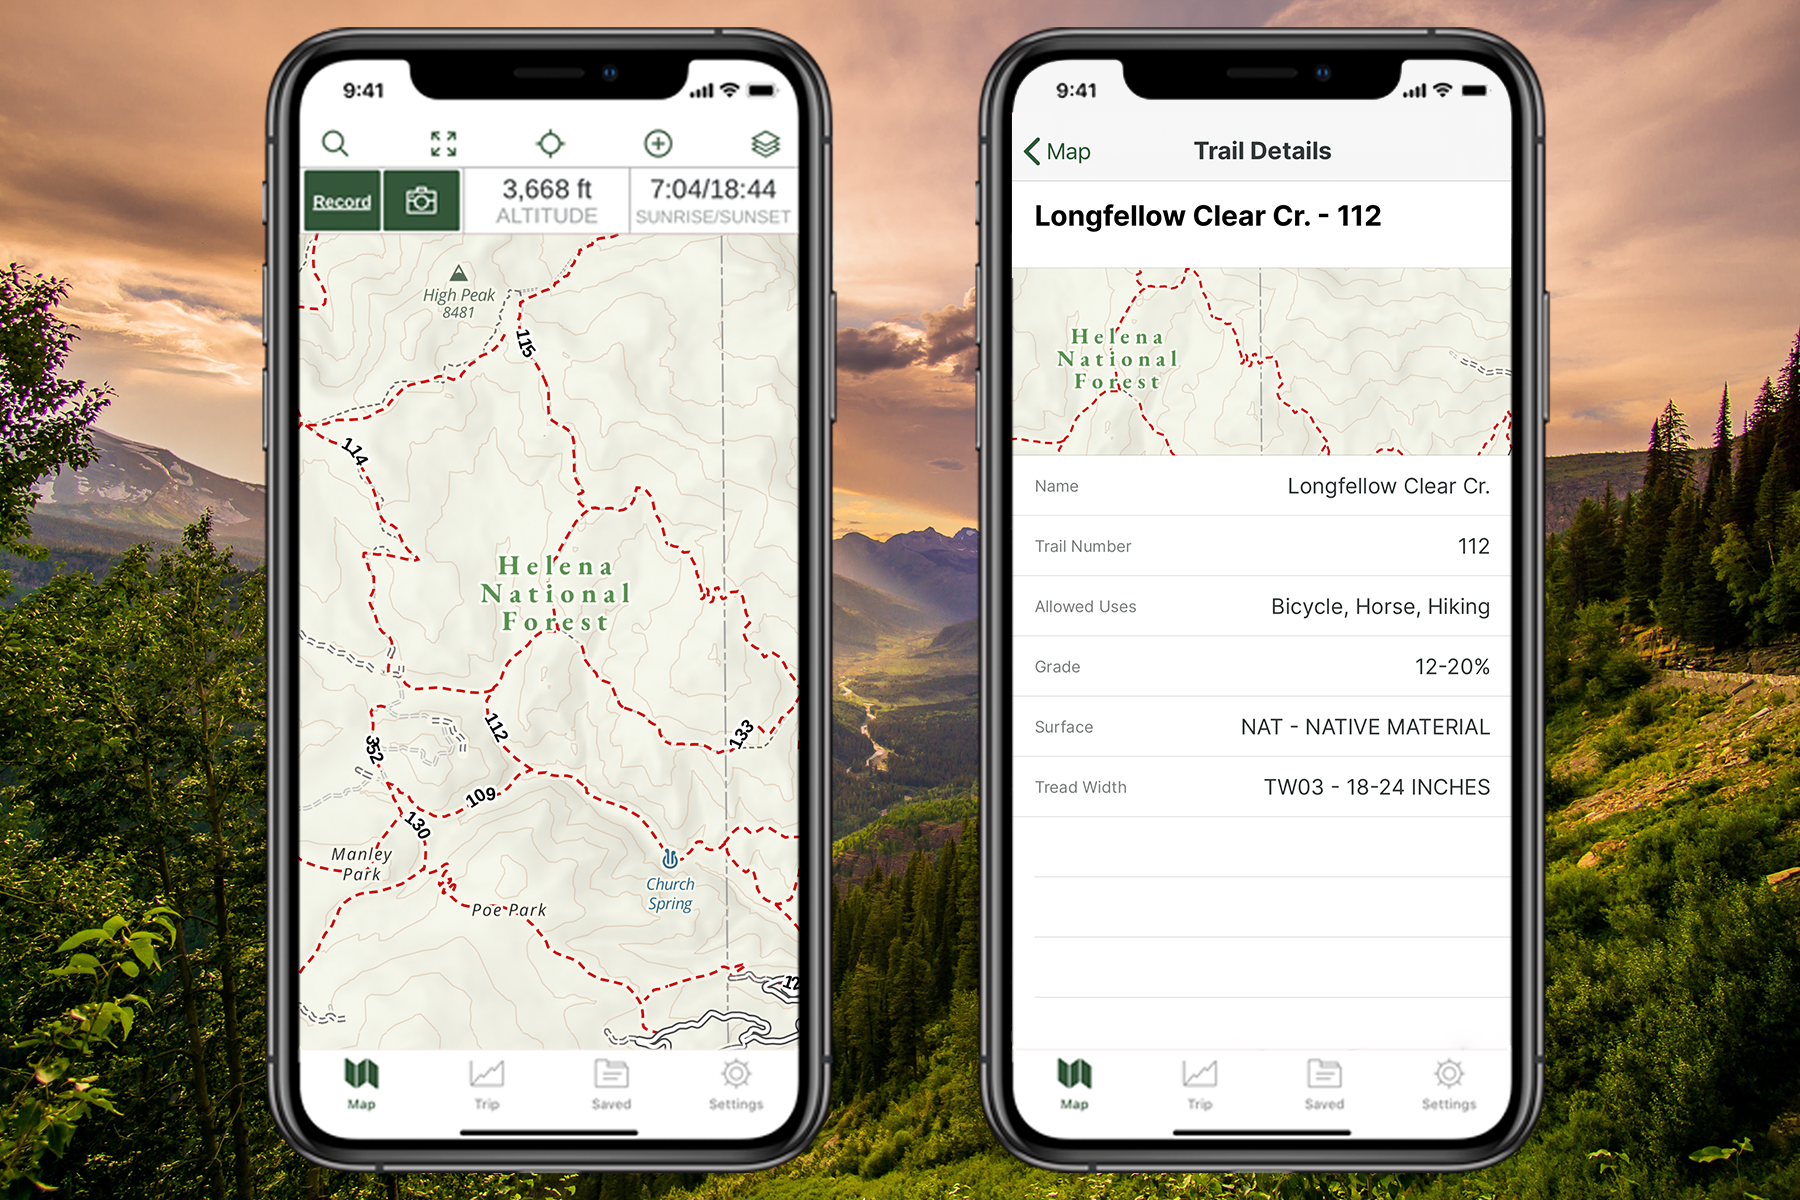 Two mobile phone screen shots of the updated USFS layer in Gaia GPS show the allowed uses for trails in Helena National Forest, as well as the surface material and tread width needed for vehicles. 